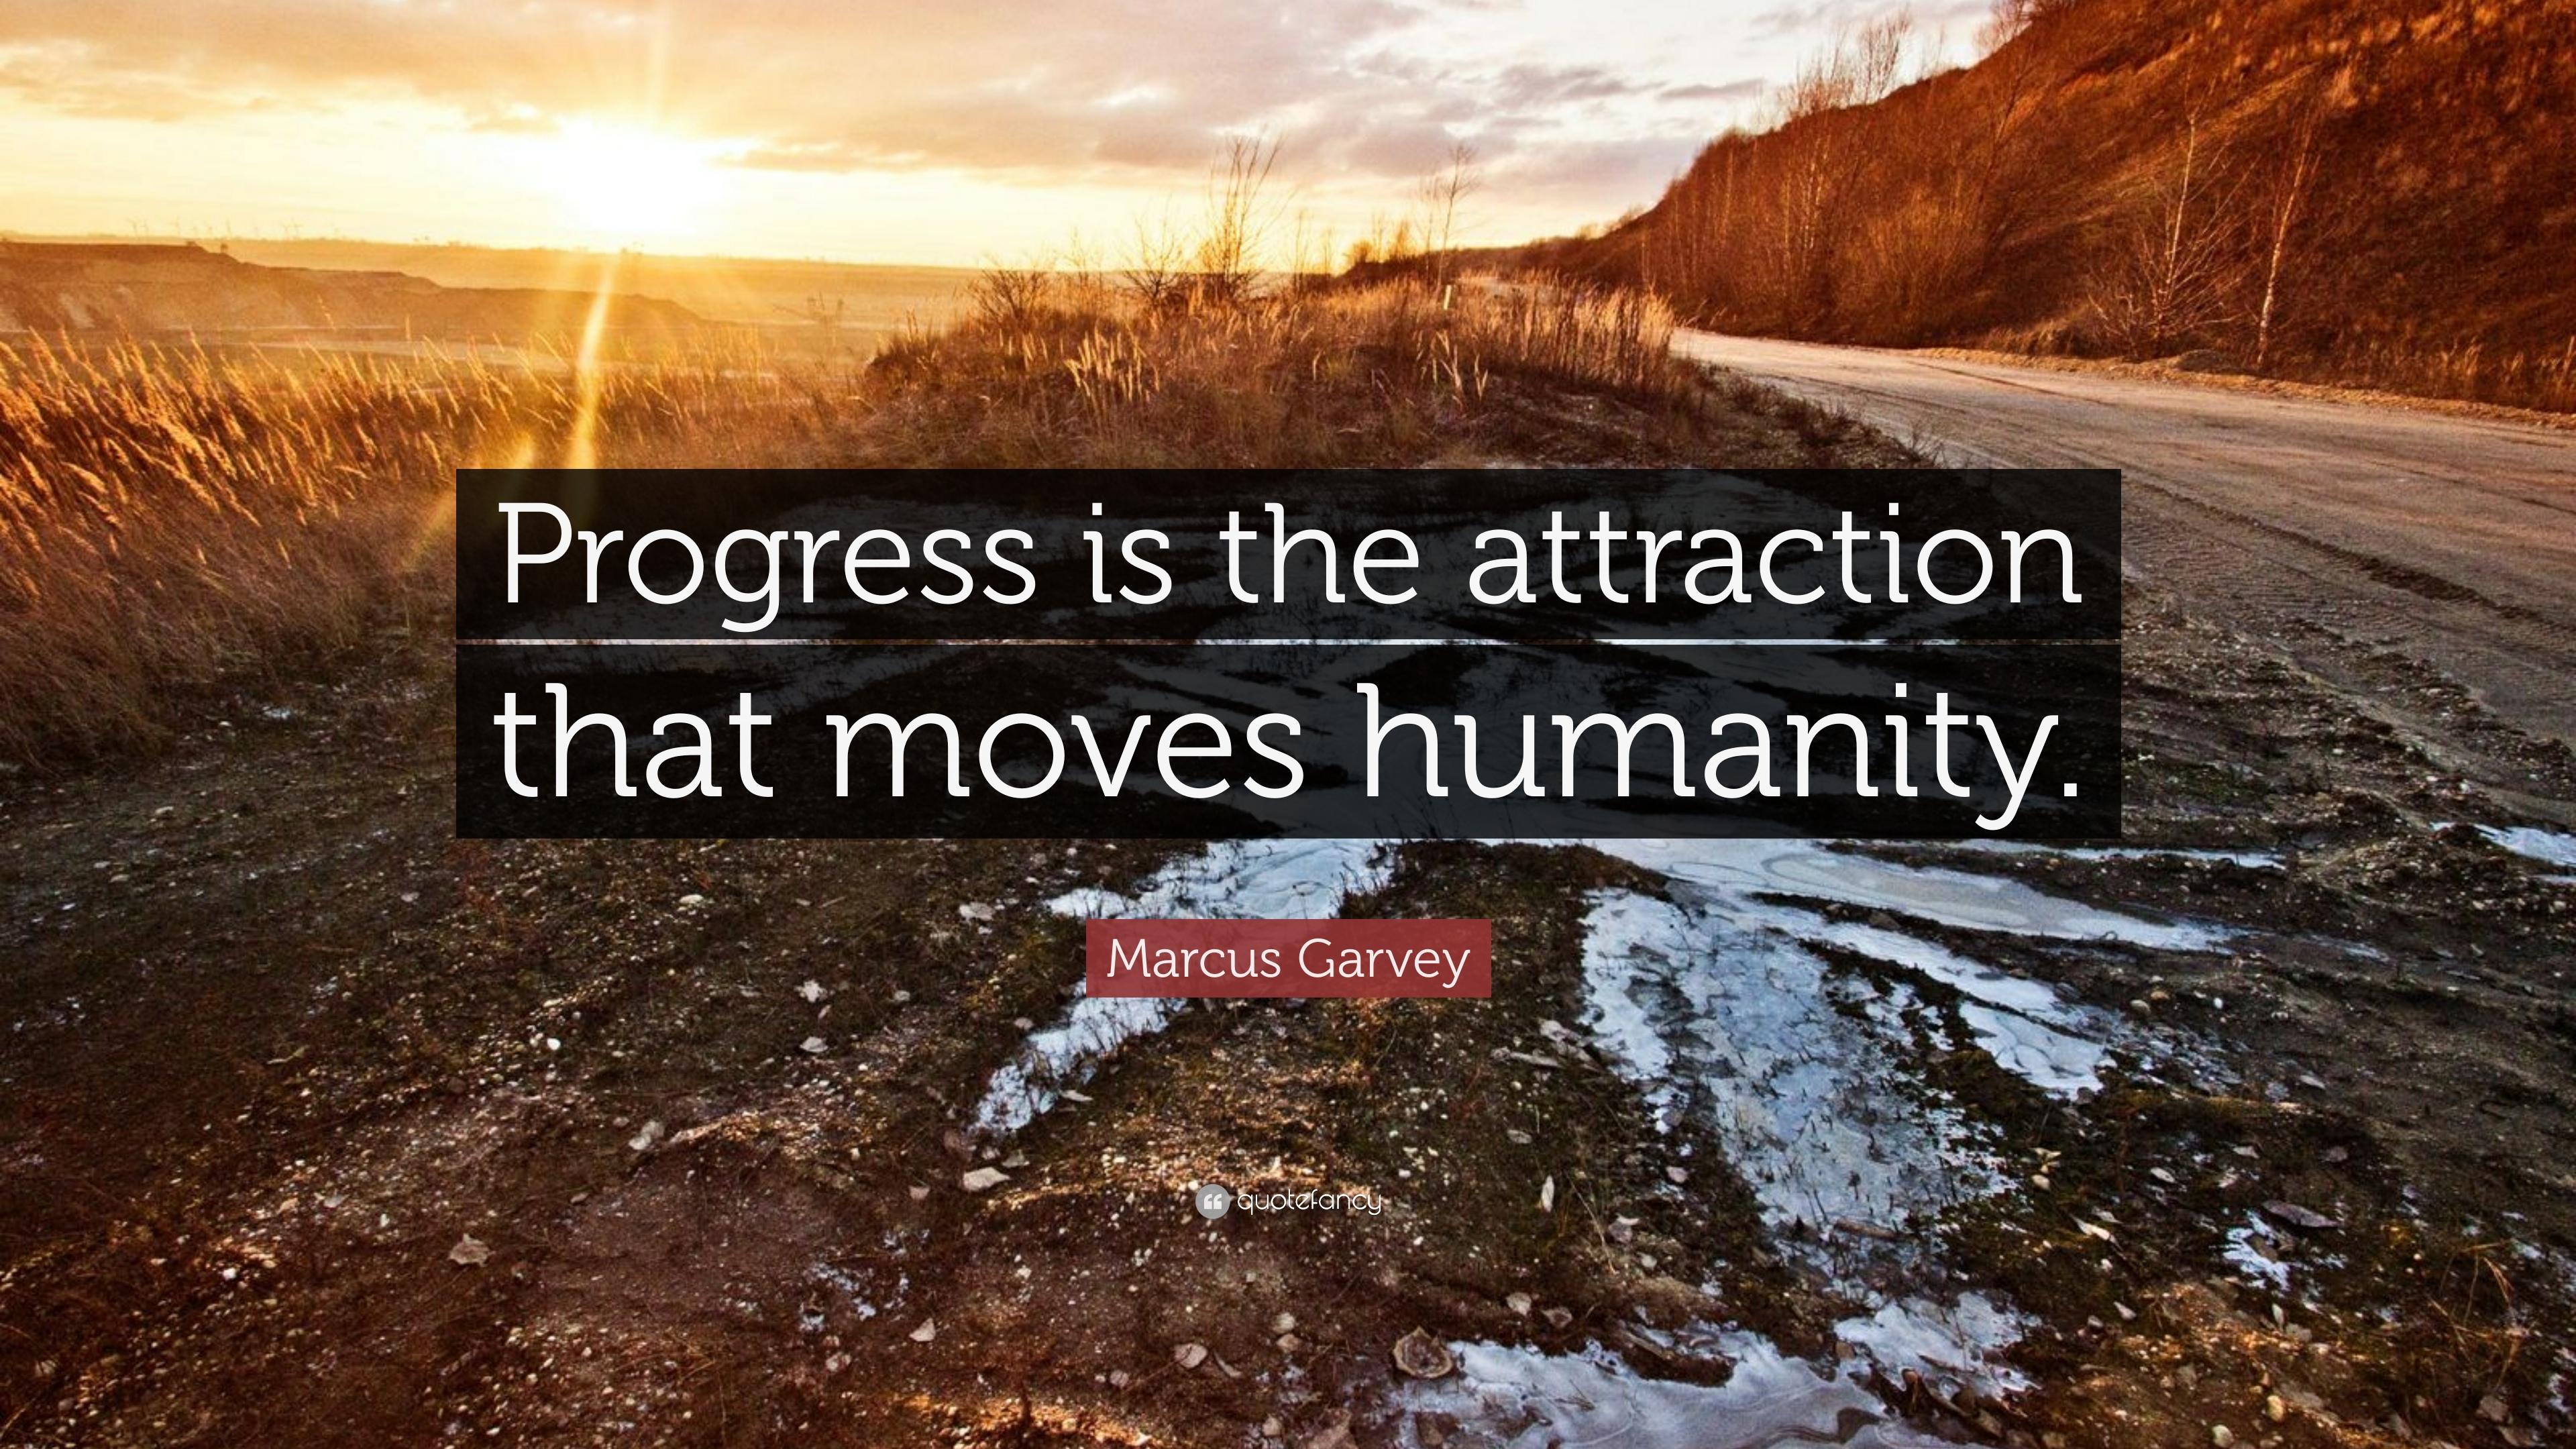 Marcus Garvey Quote: “Progress is the attraction that moves